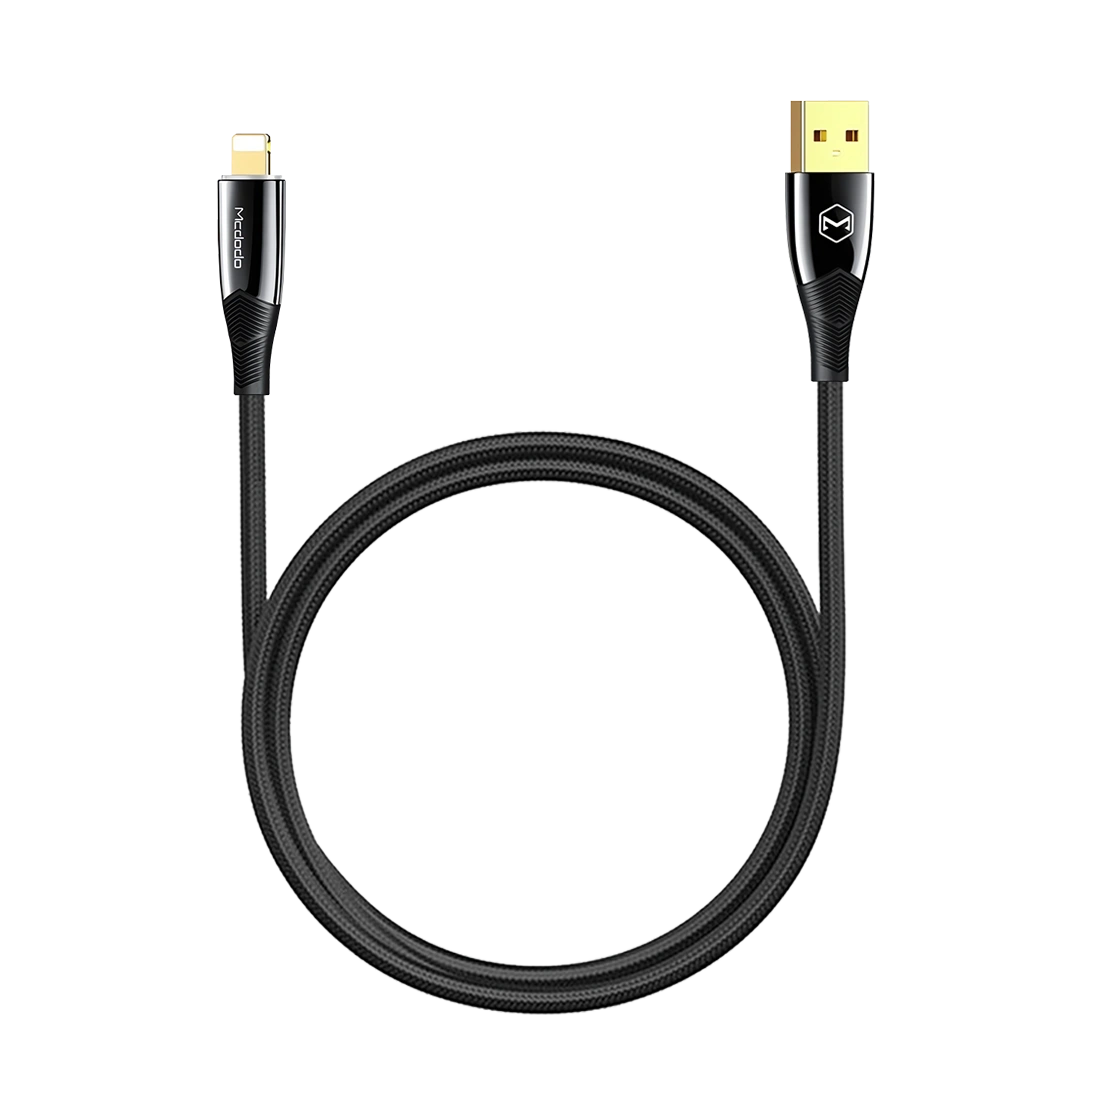 Mcdodo Charge Cable USB to Lightning 1.8m CA-8063